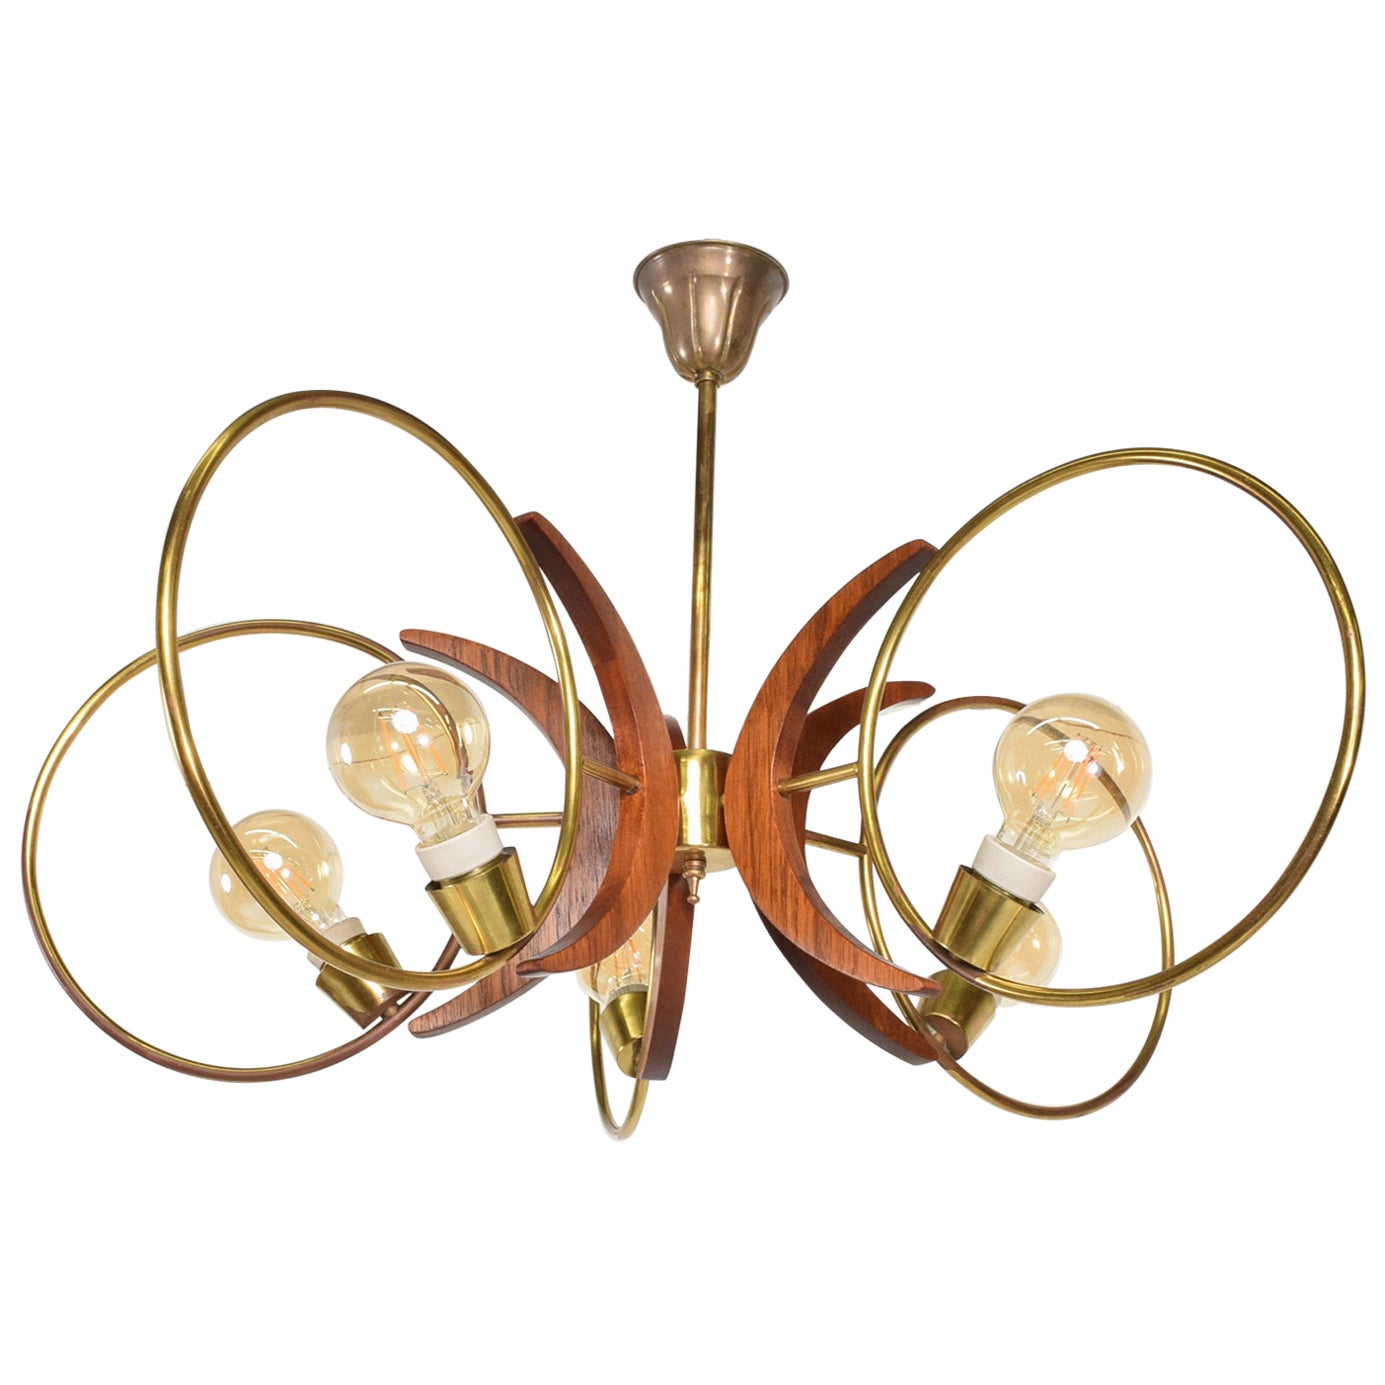 1960s Alluring Five Ring Sculptural Chandelier Brass and Mahogany Mexico City